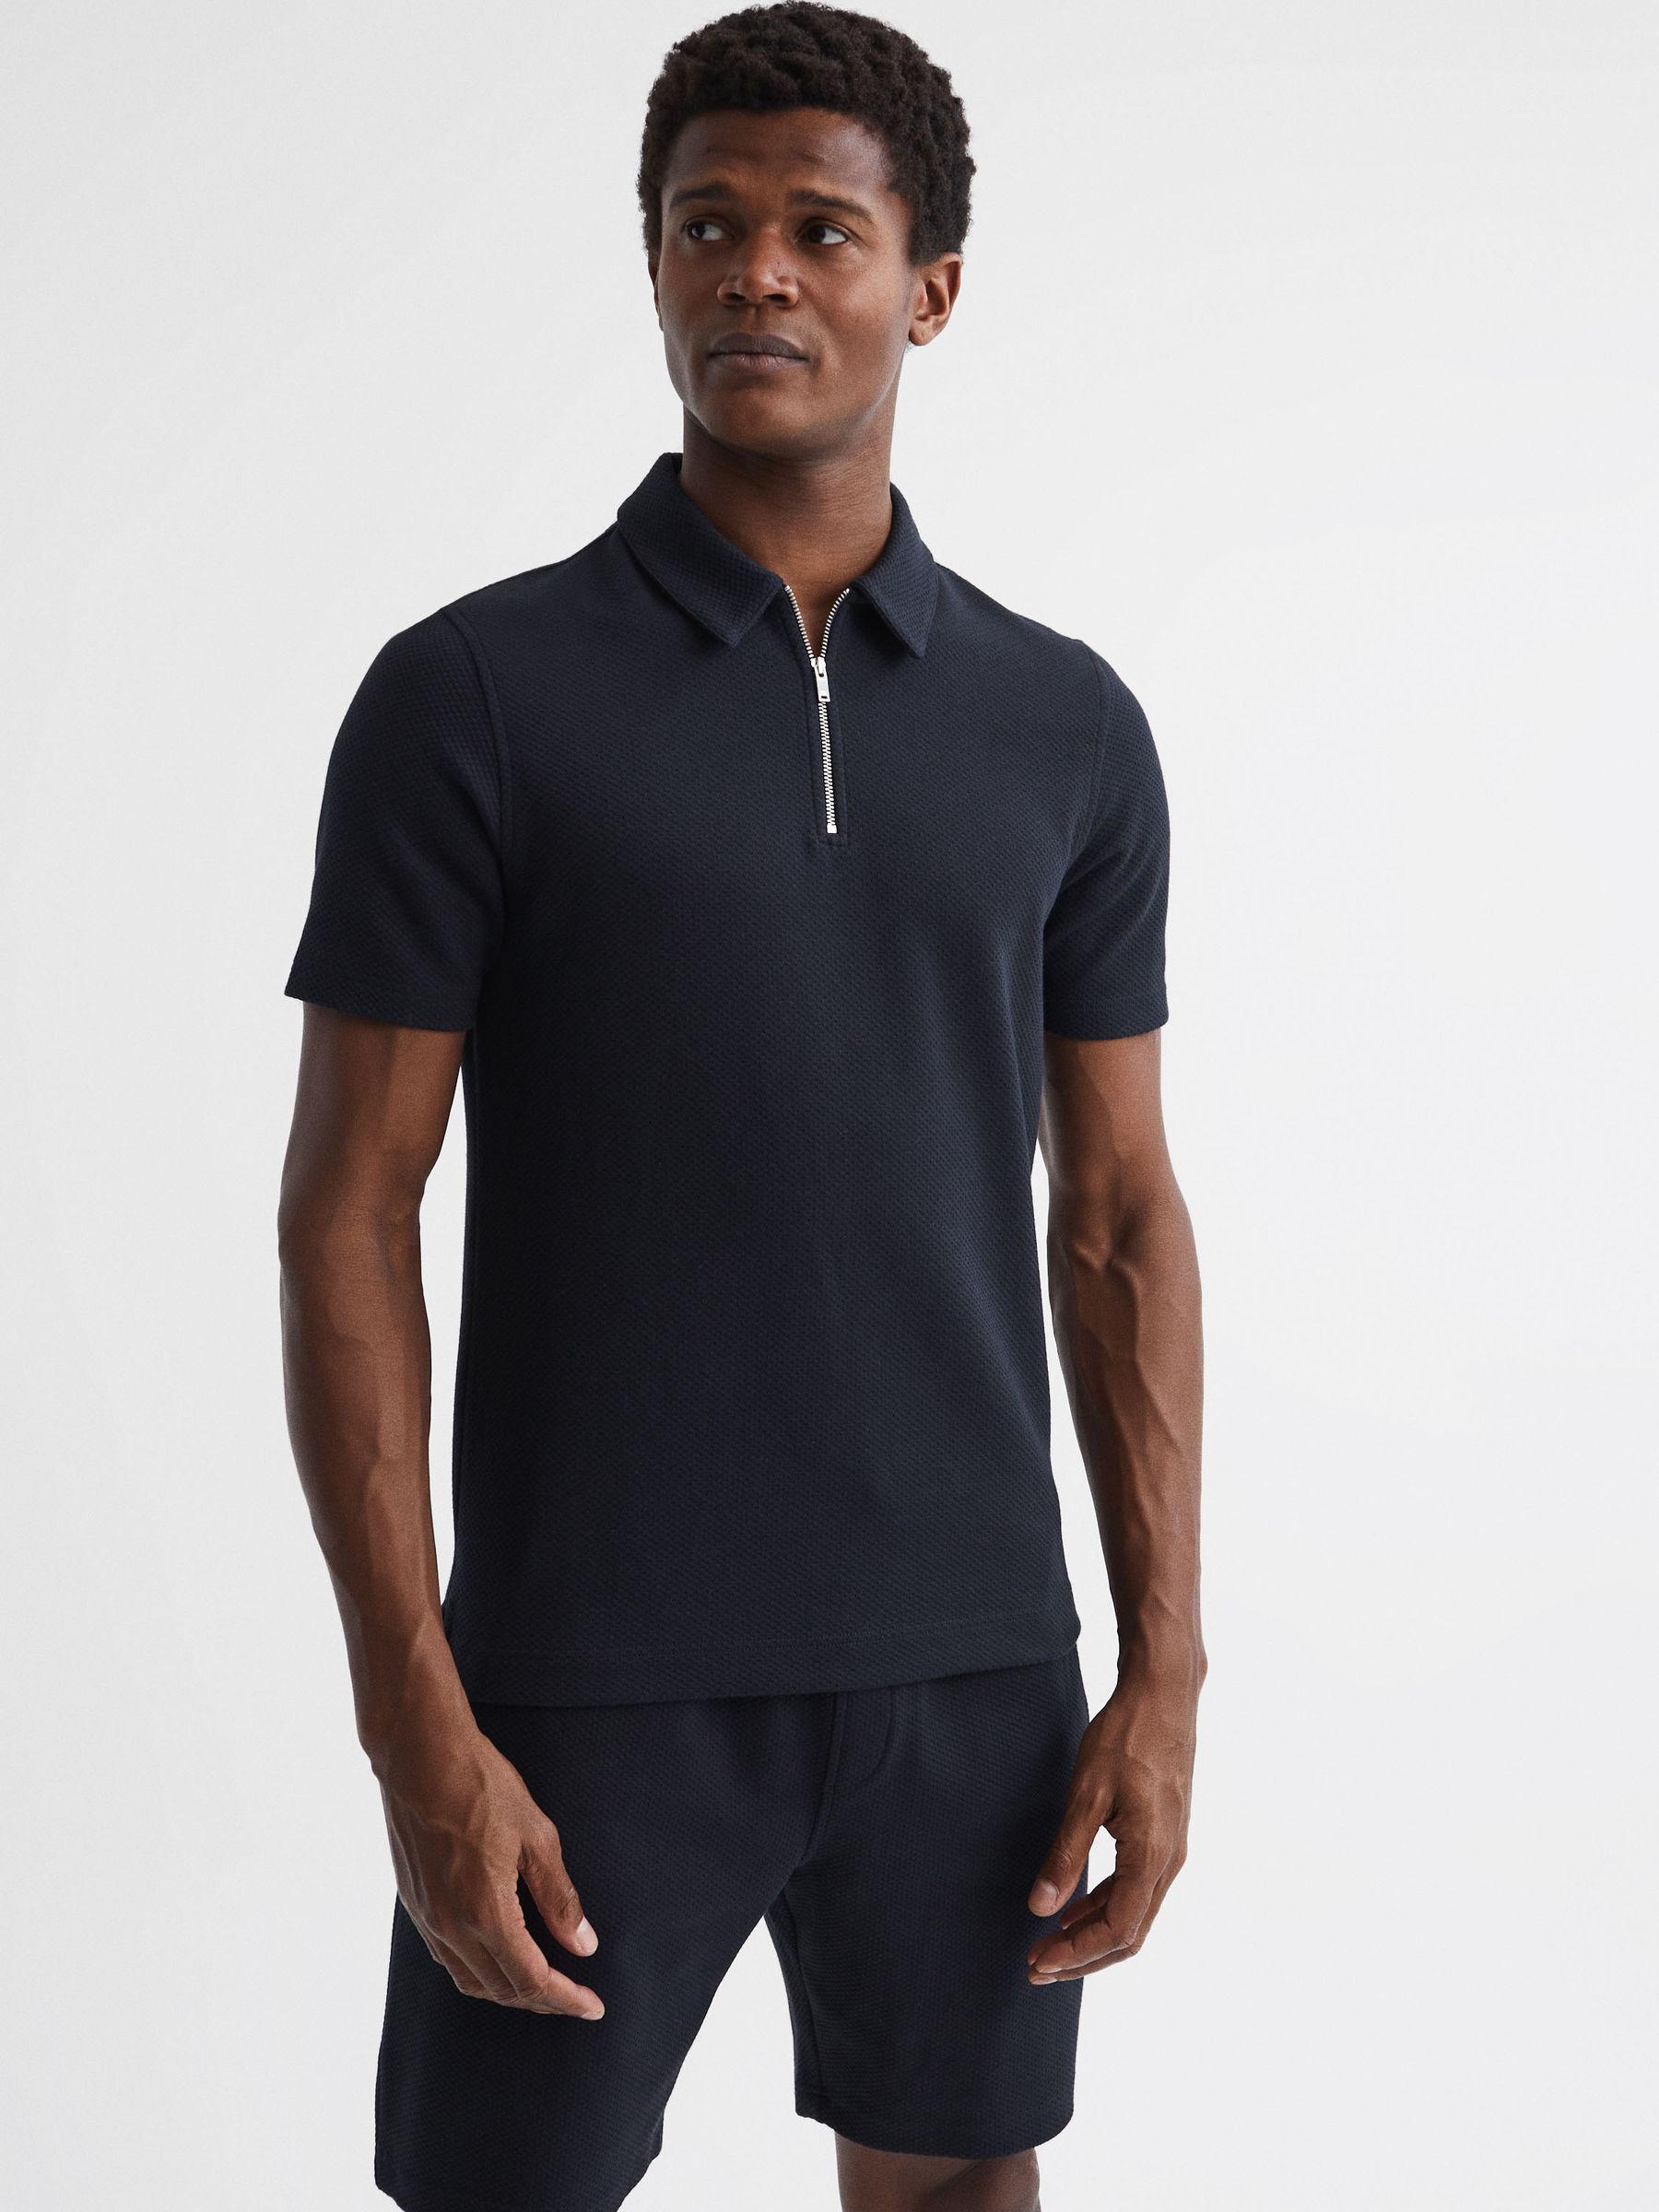 Reiss Creed Slim Fit Textured Half Zip Polo Shirt - REISS